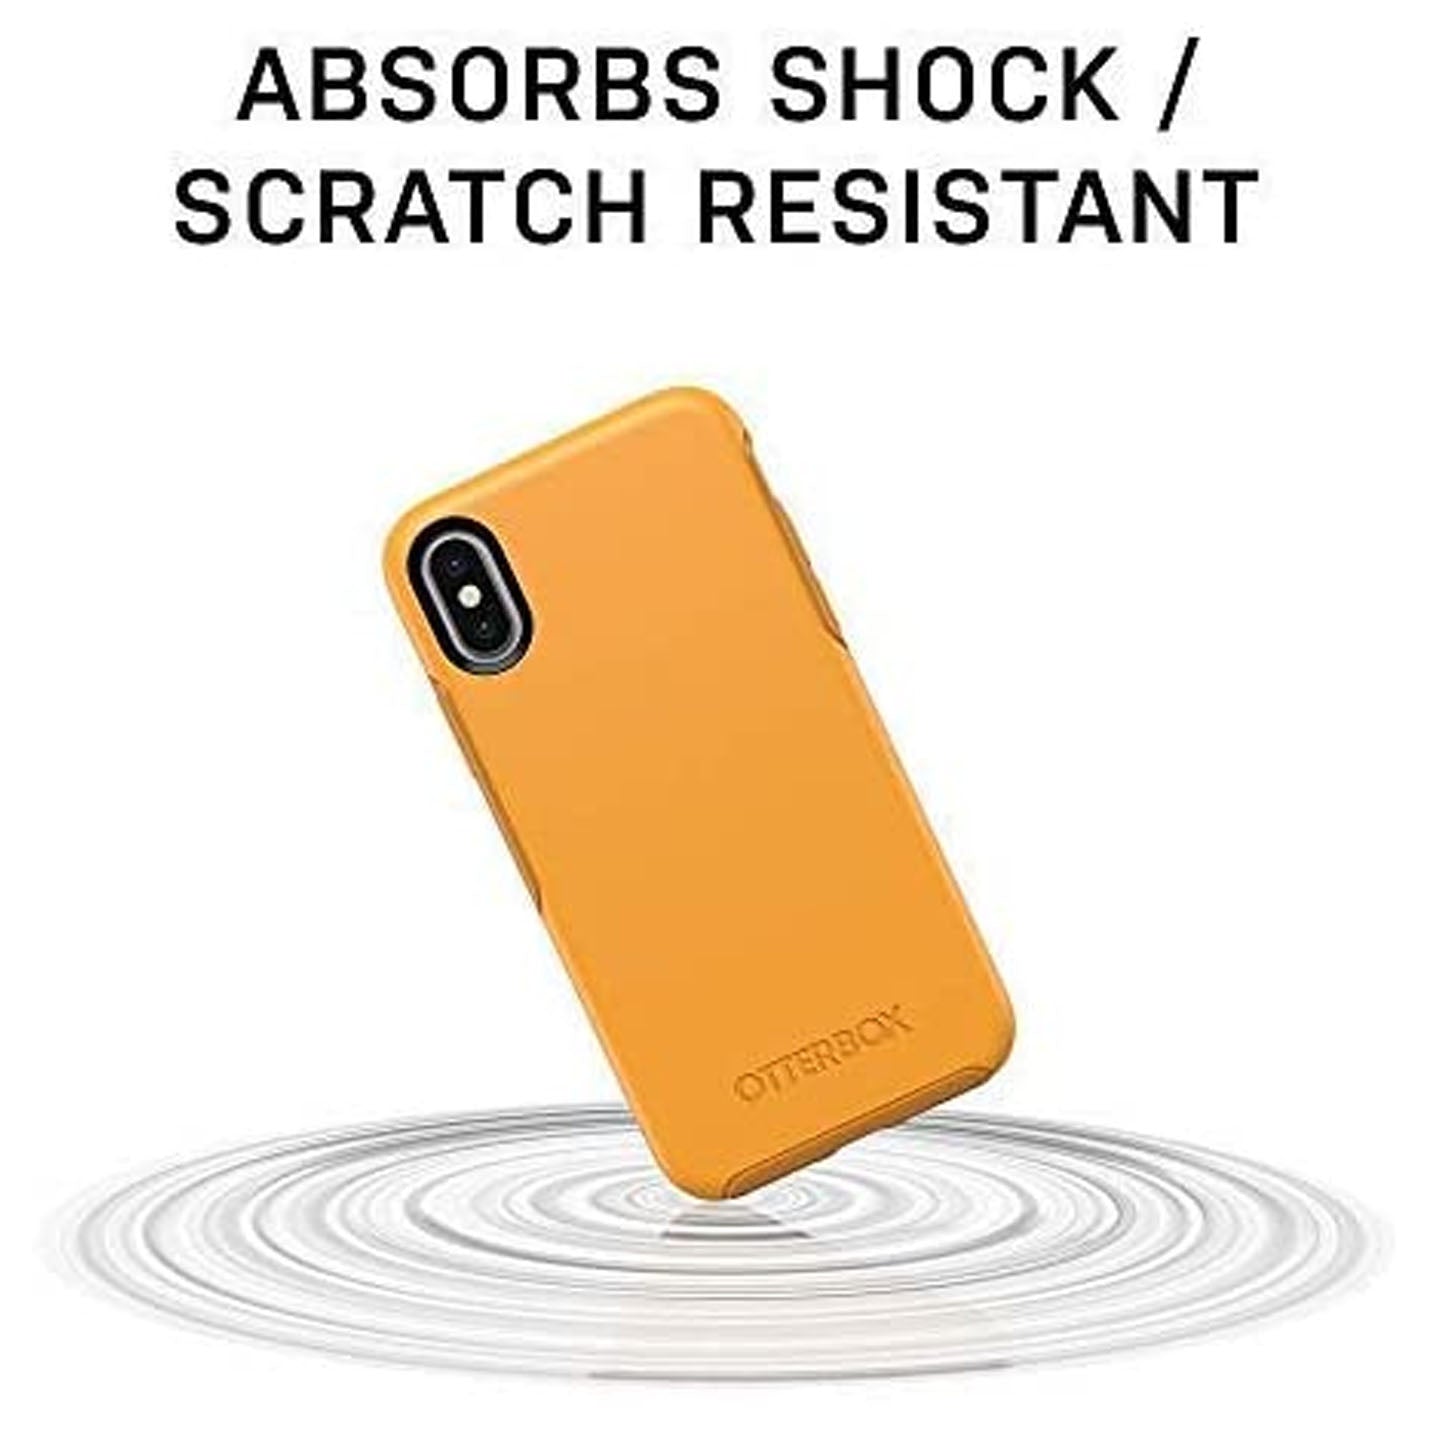 [RACKV2_CLEARANCE] Otterbox Symmetry for iPhone X - Xs - Ashed For It (Barcode: 660543469322  )